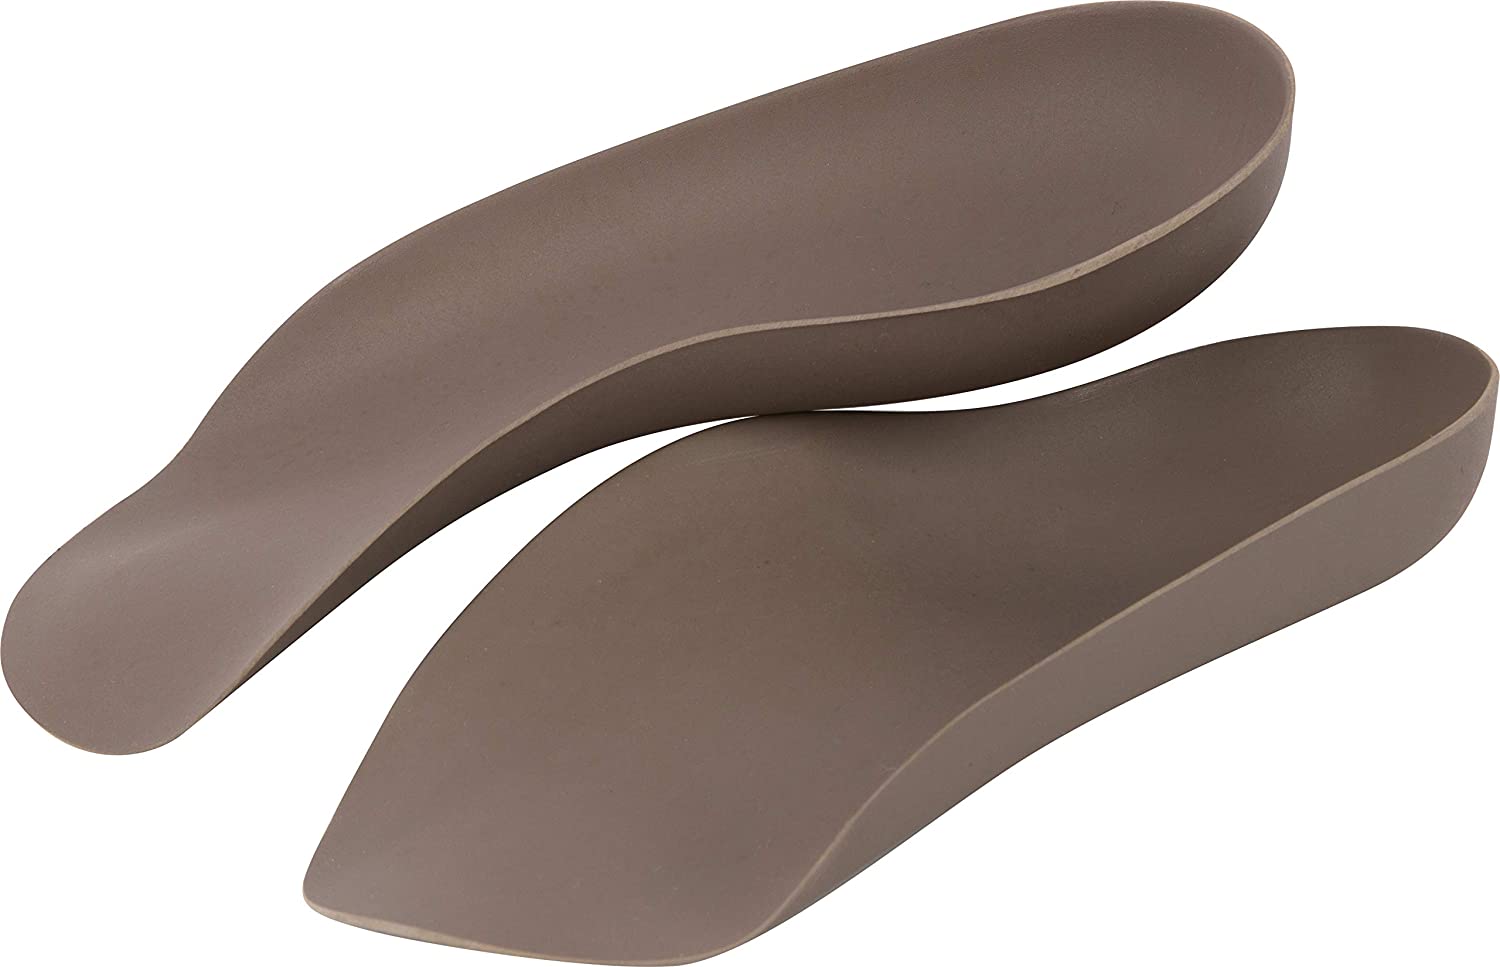 Corefit Custom Orthotics Arch Supports - Custom Fit at Home 3/4 Plantar Fasciitis Inserts - Dip in Hot Water & Fit to Foot - Handcrafted Podiatrist Grade Shoe Inserts (Men's UK Size 8/Men's US Size 9)